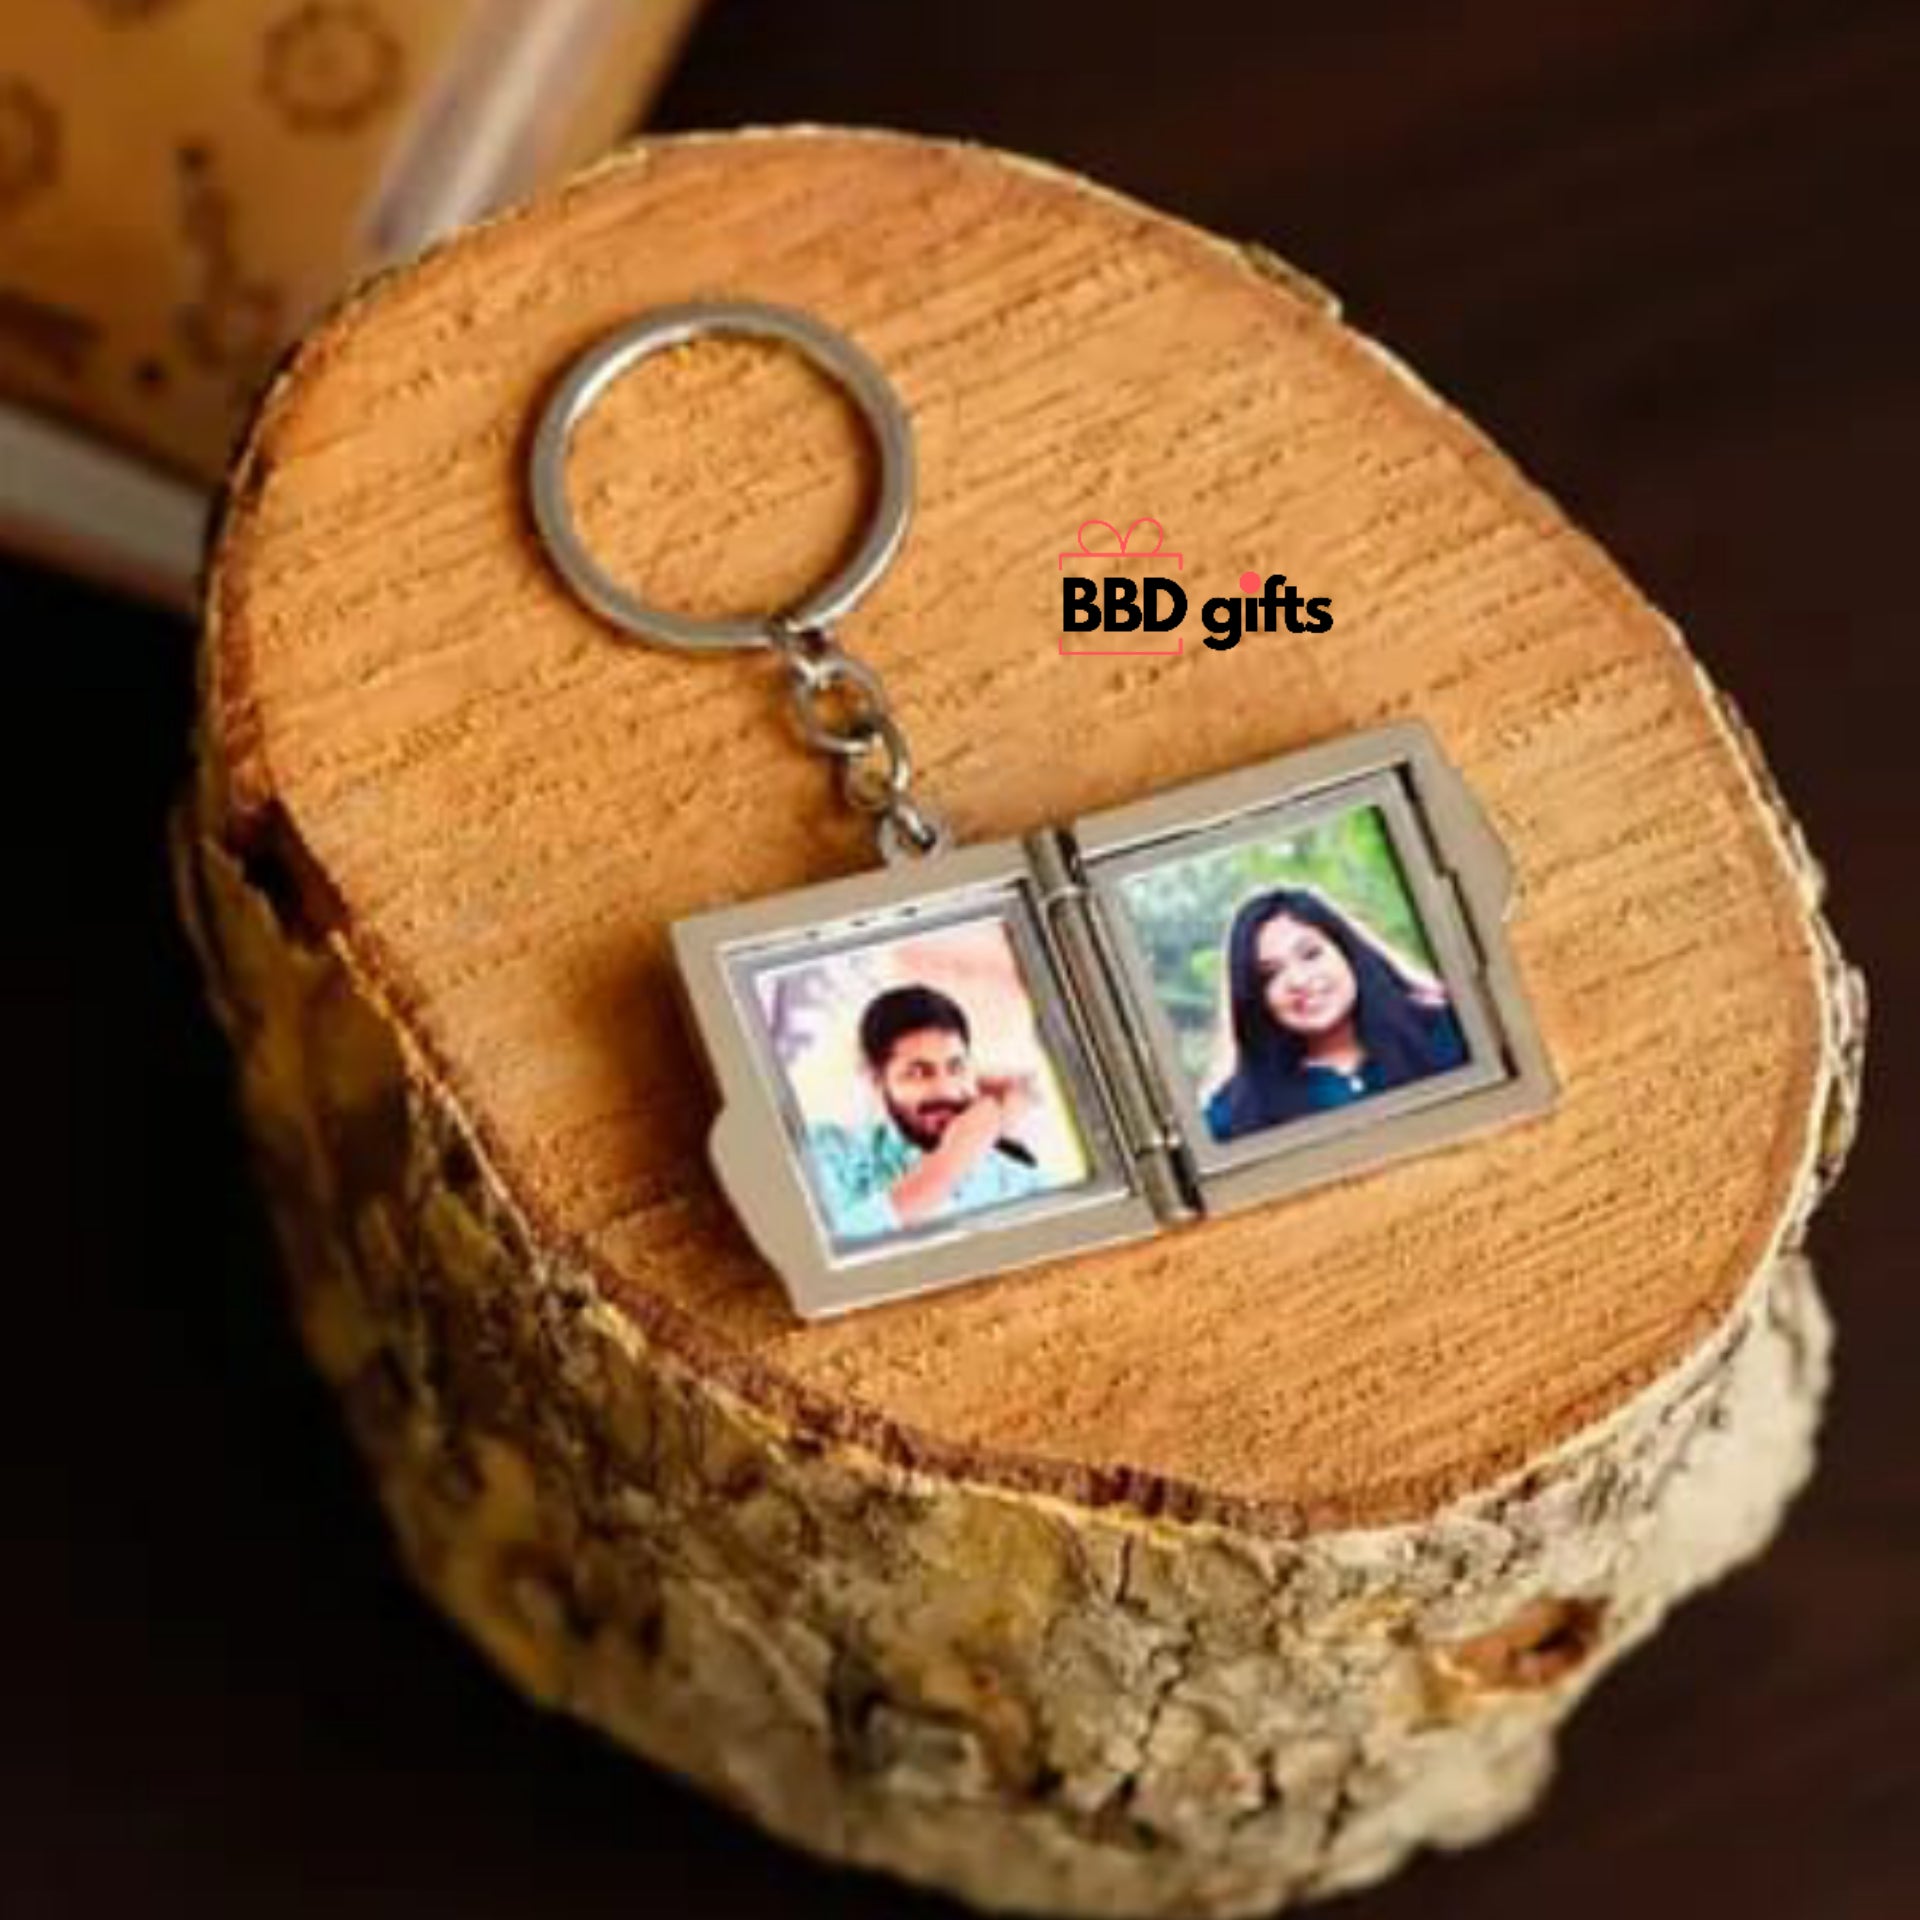 Sparkle Gift and Decor Personalised Round Metal Key Chain Gifts for Couple  for Boyfriend for Girlfriend for wife for wedding for Anniversary for  corporate & All Occassions : Amazon.in: Bags, Wallets and